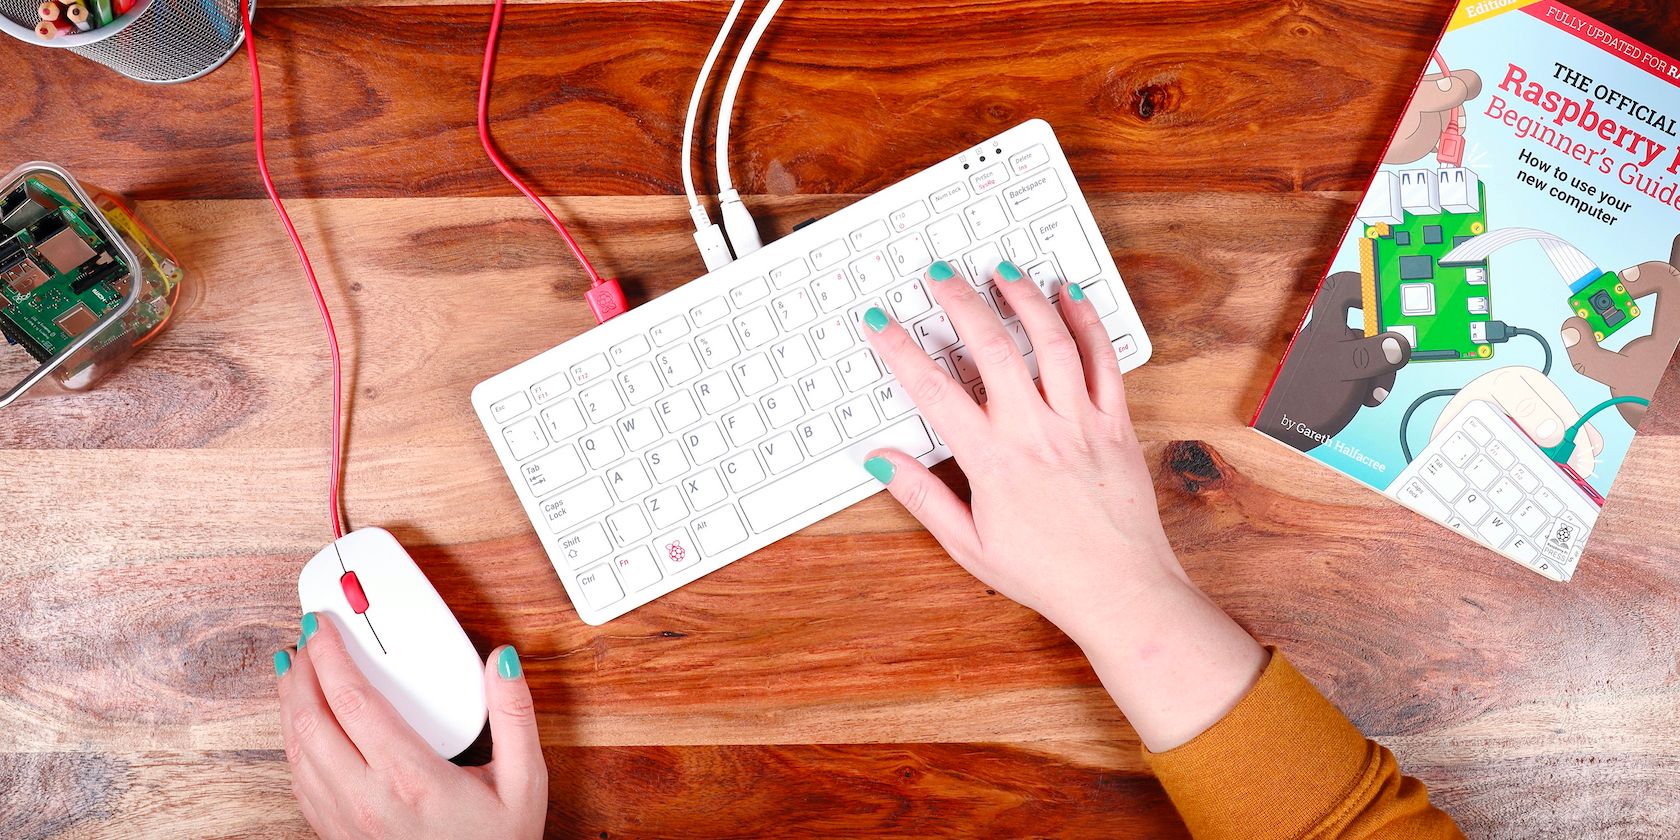 Hand on a mouse and Raspberry Pi 400 keyboard on a desk